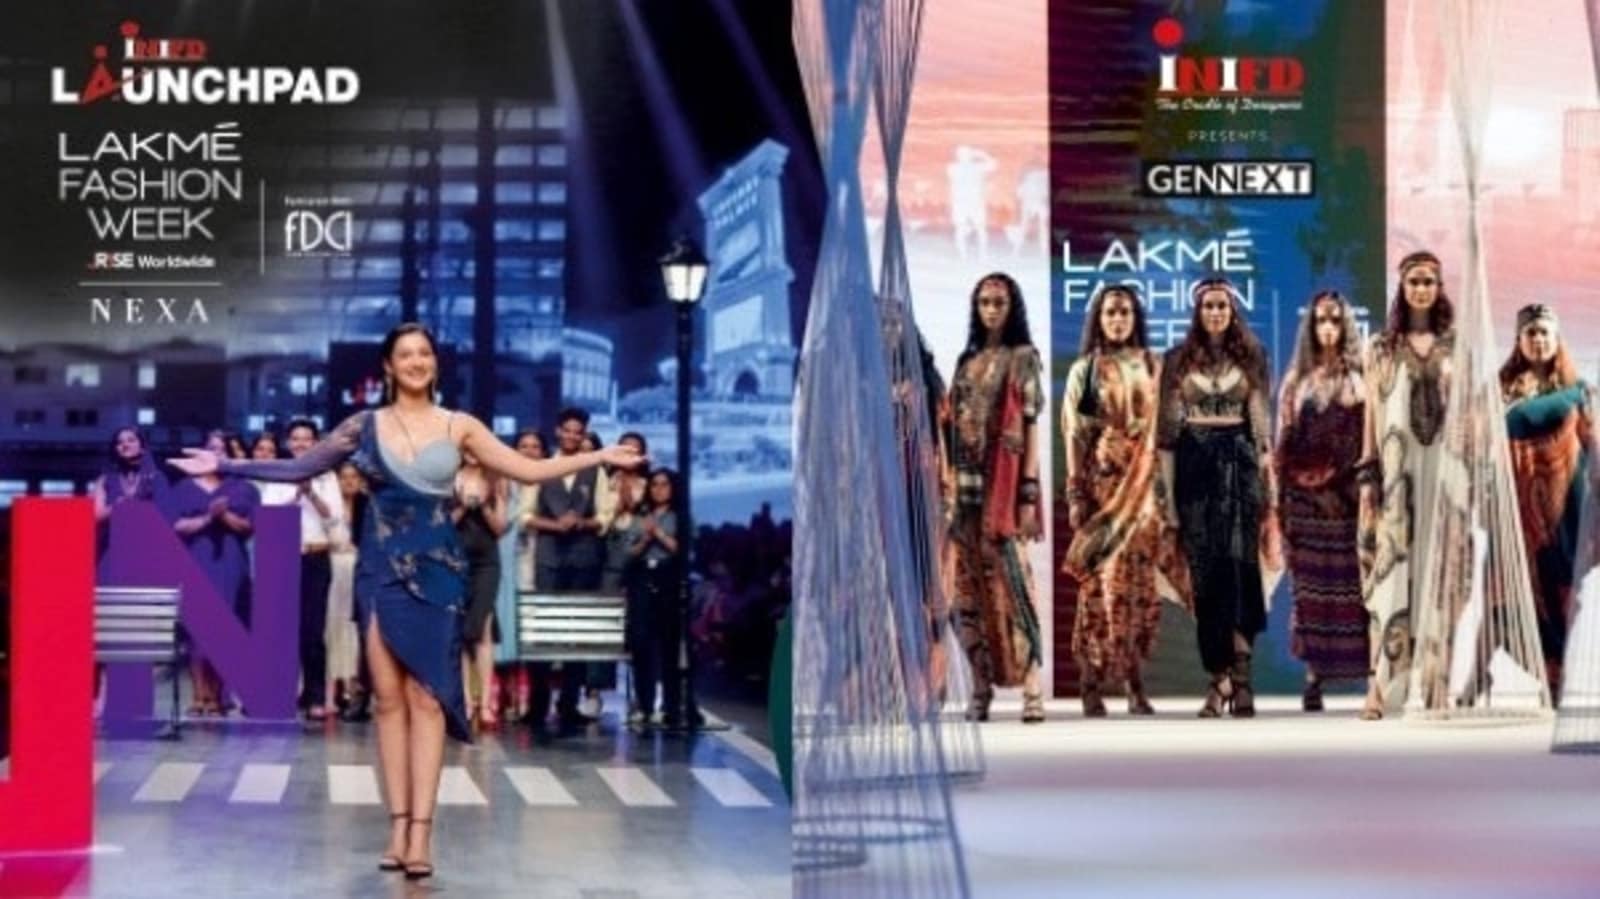 INIFD Proudly Presents 2 Shows at Lakmé Fashion Week in partnership